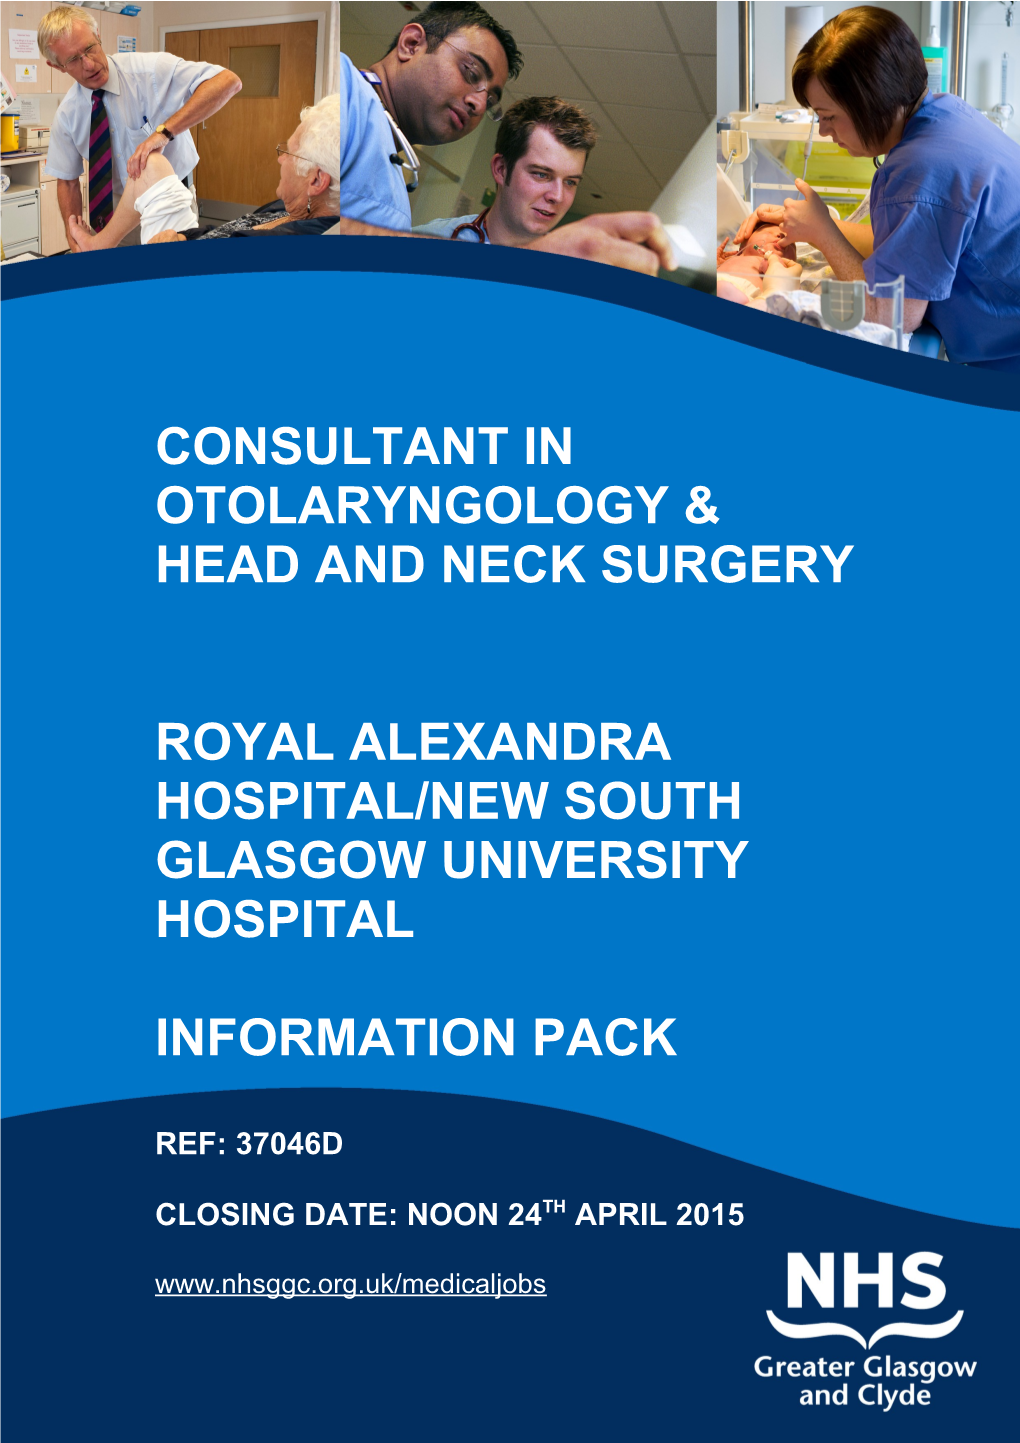 Consultant in Otolaryngology & Head and Neck Surgery